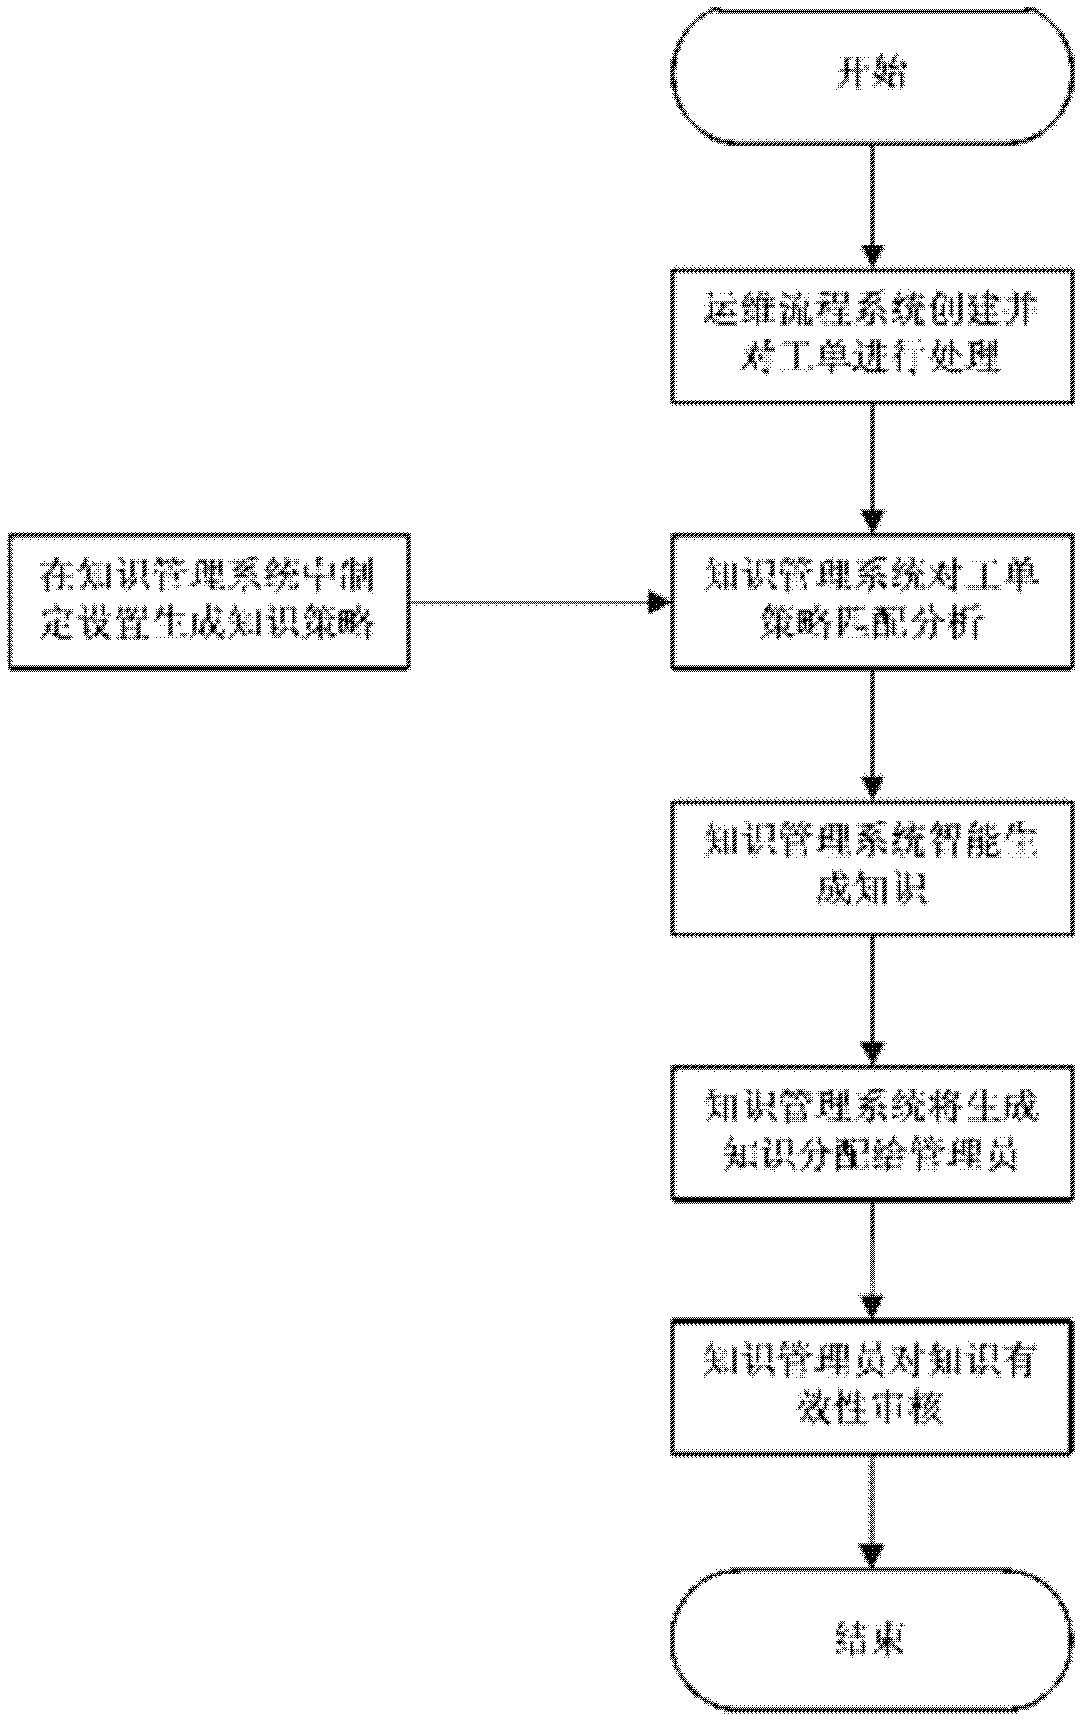 Method and device for generating operation and maintenance knowledge base based on operation and maintenance work order